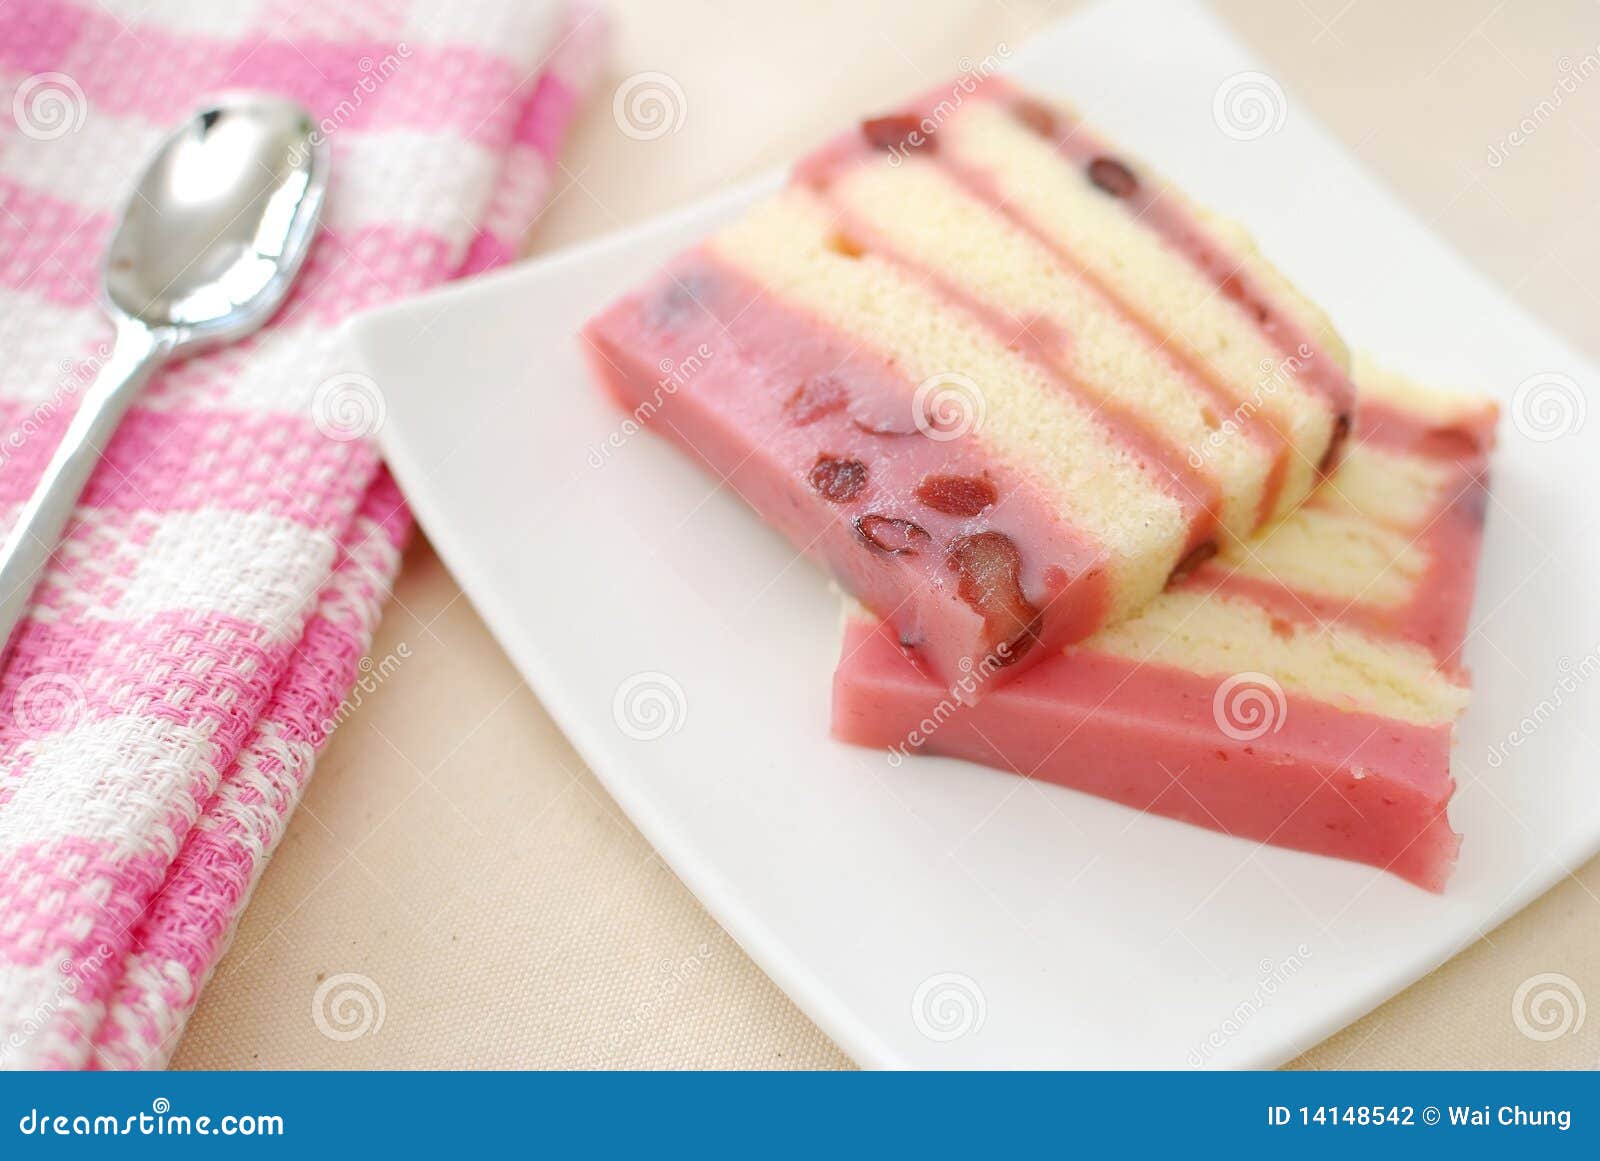 healthy red bean cake with spoon